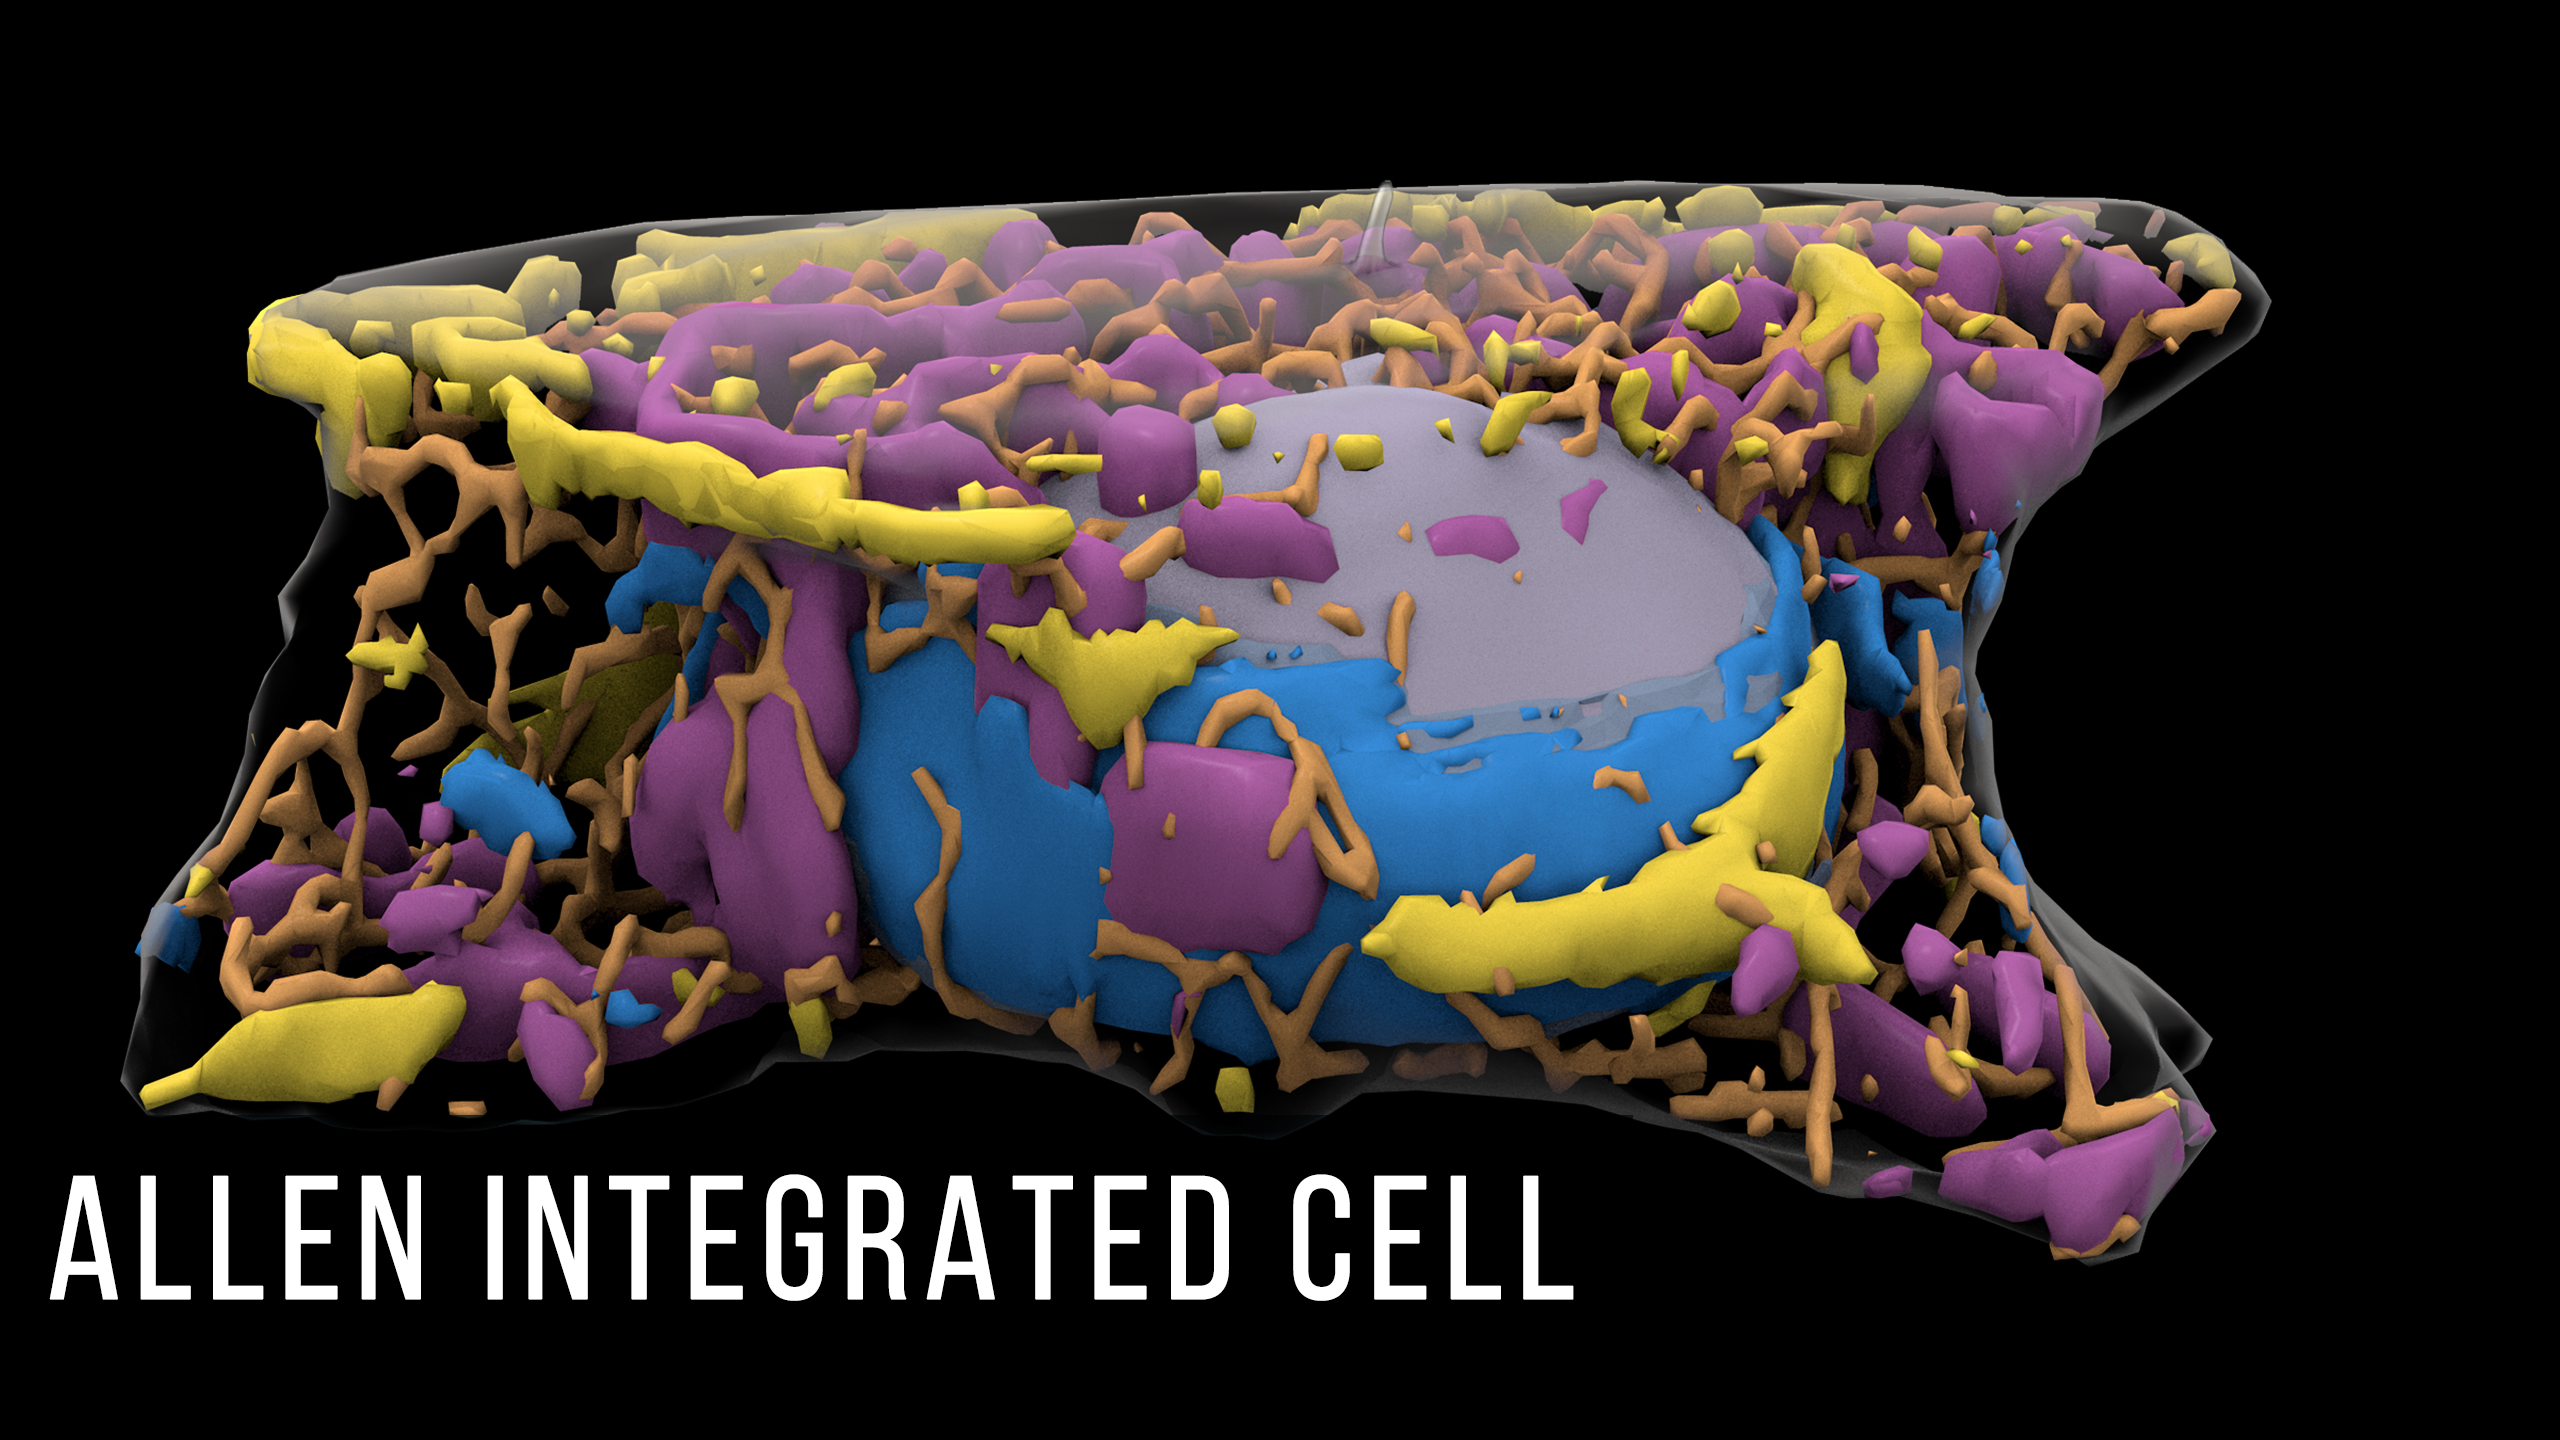 Allen Integrated Cell: A new way to see inside live human ce